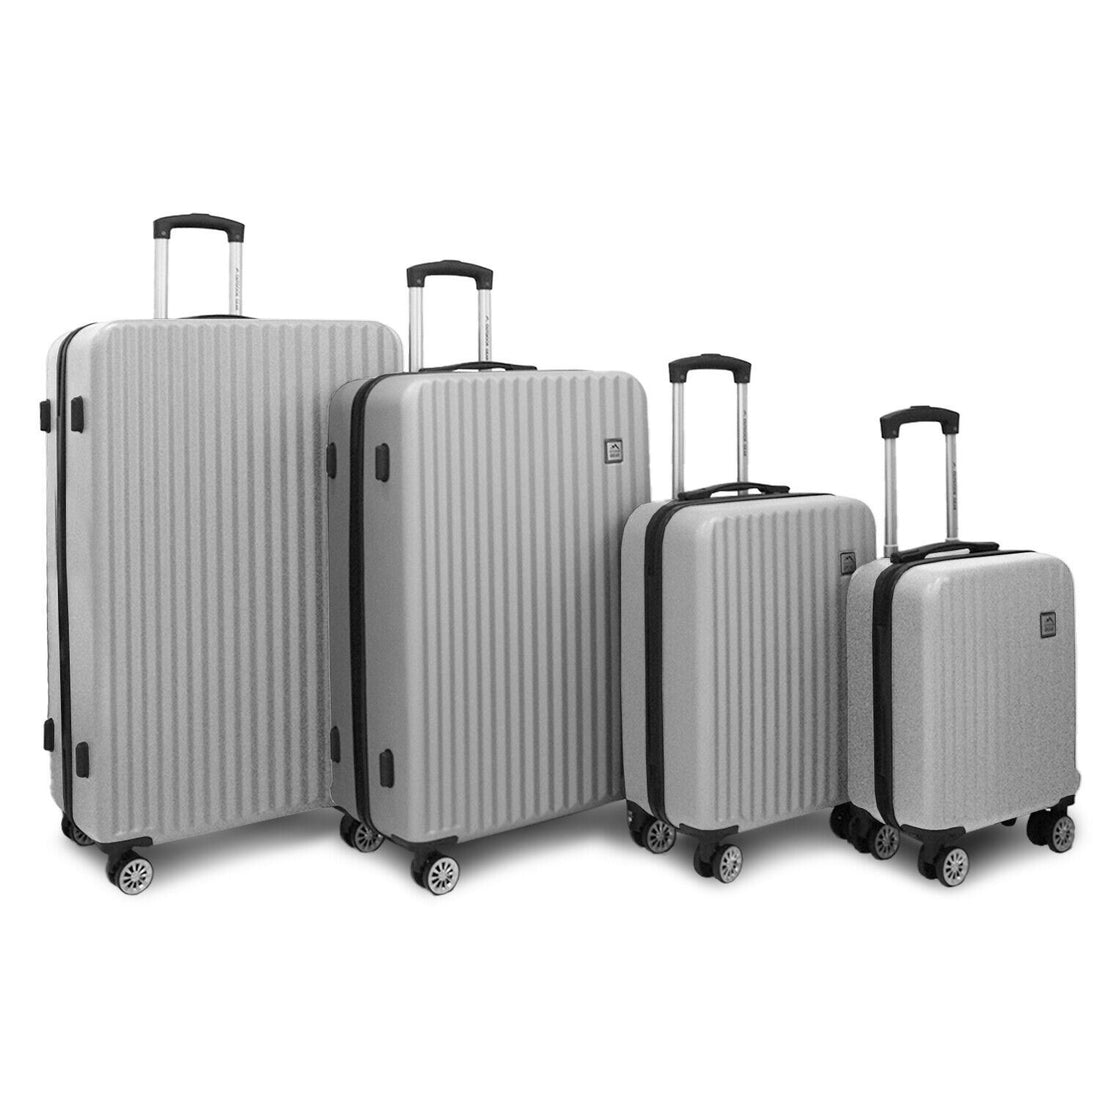 Hard Shell Silver Classic Suitcase 8 Wheel Luggage Bag